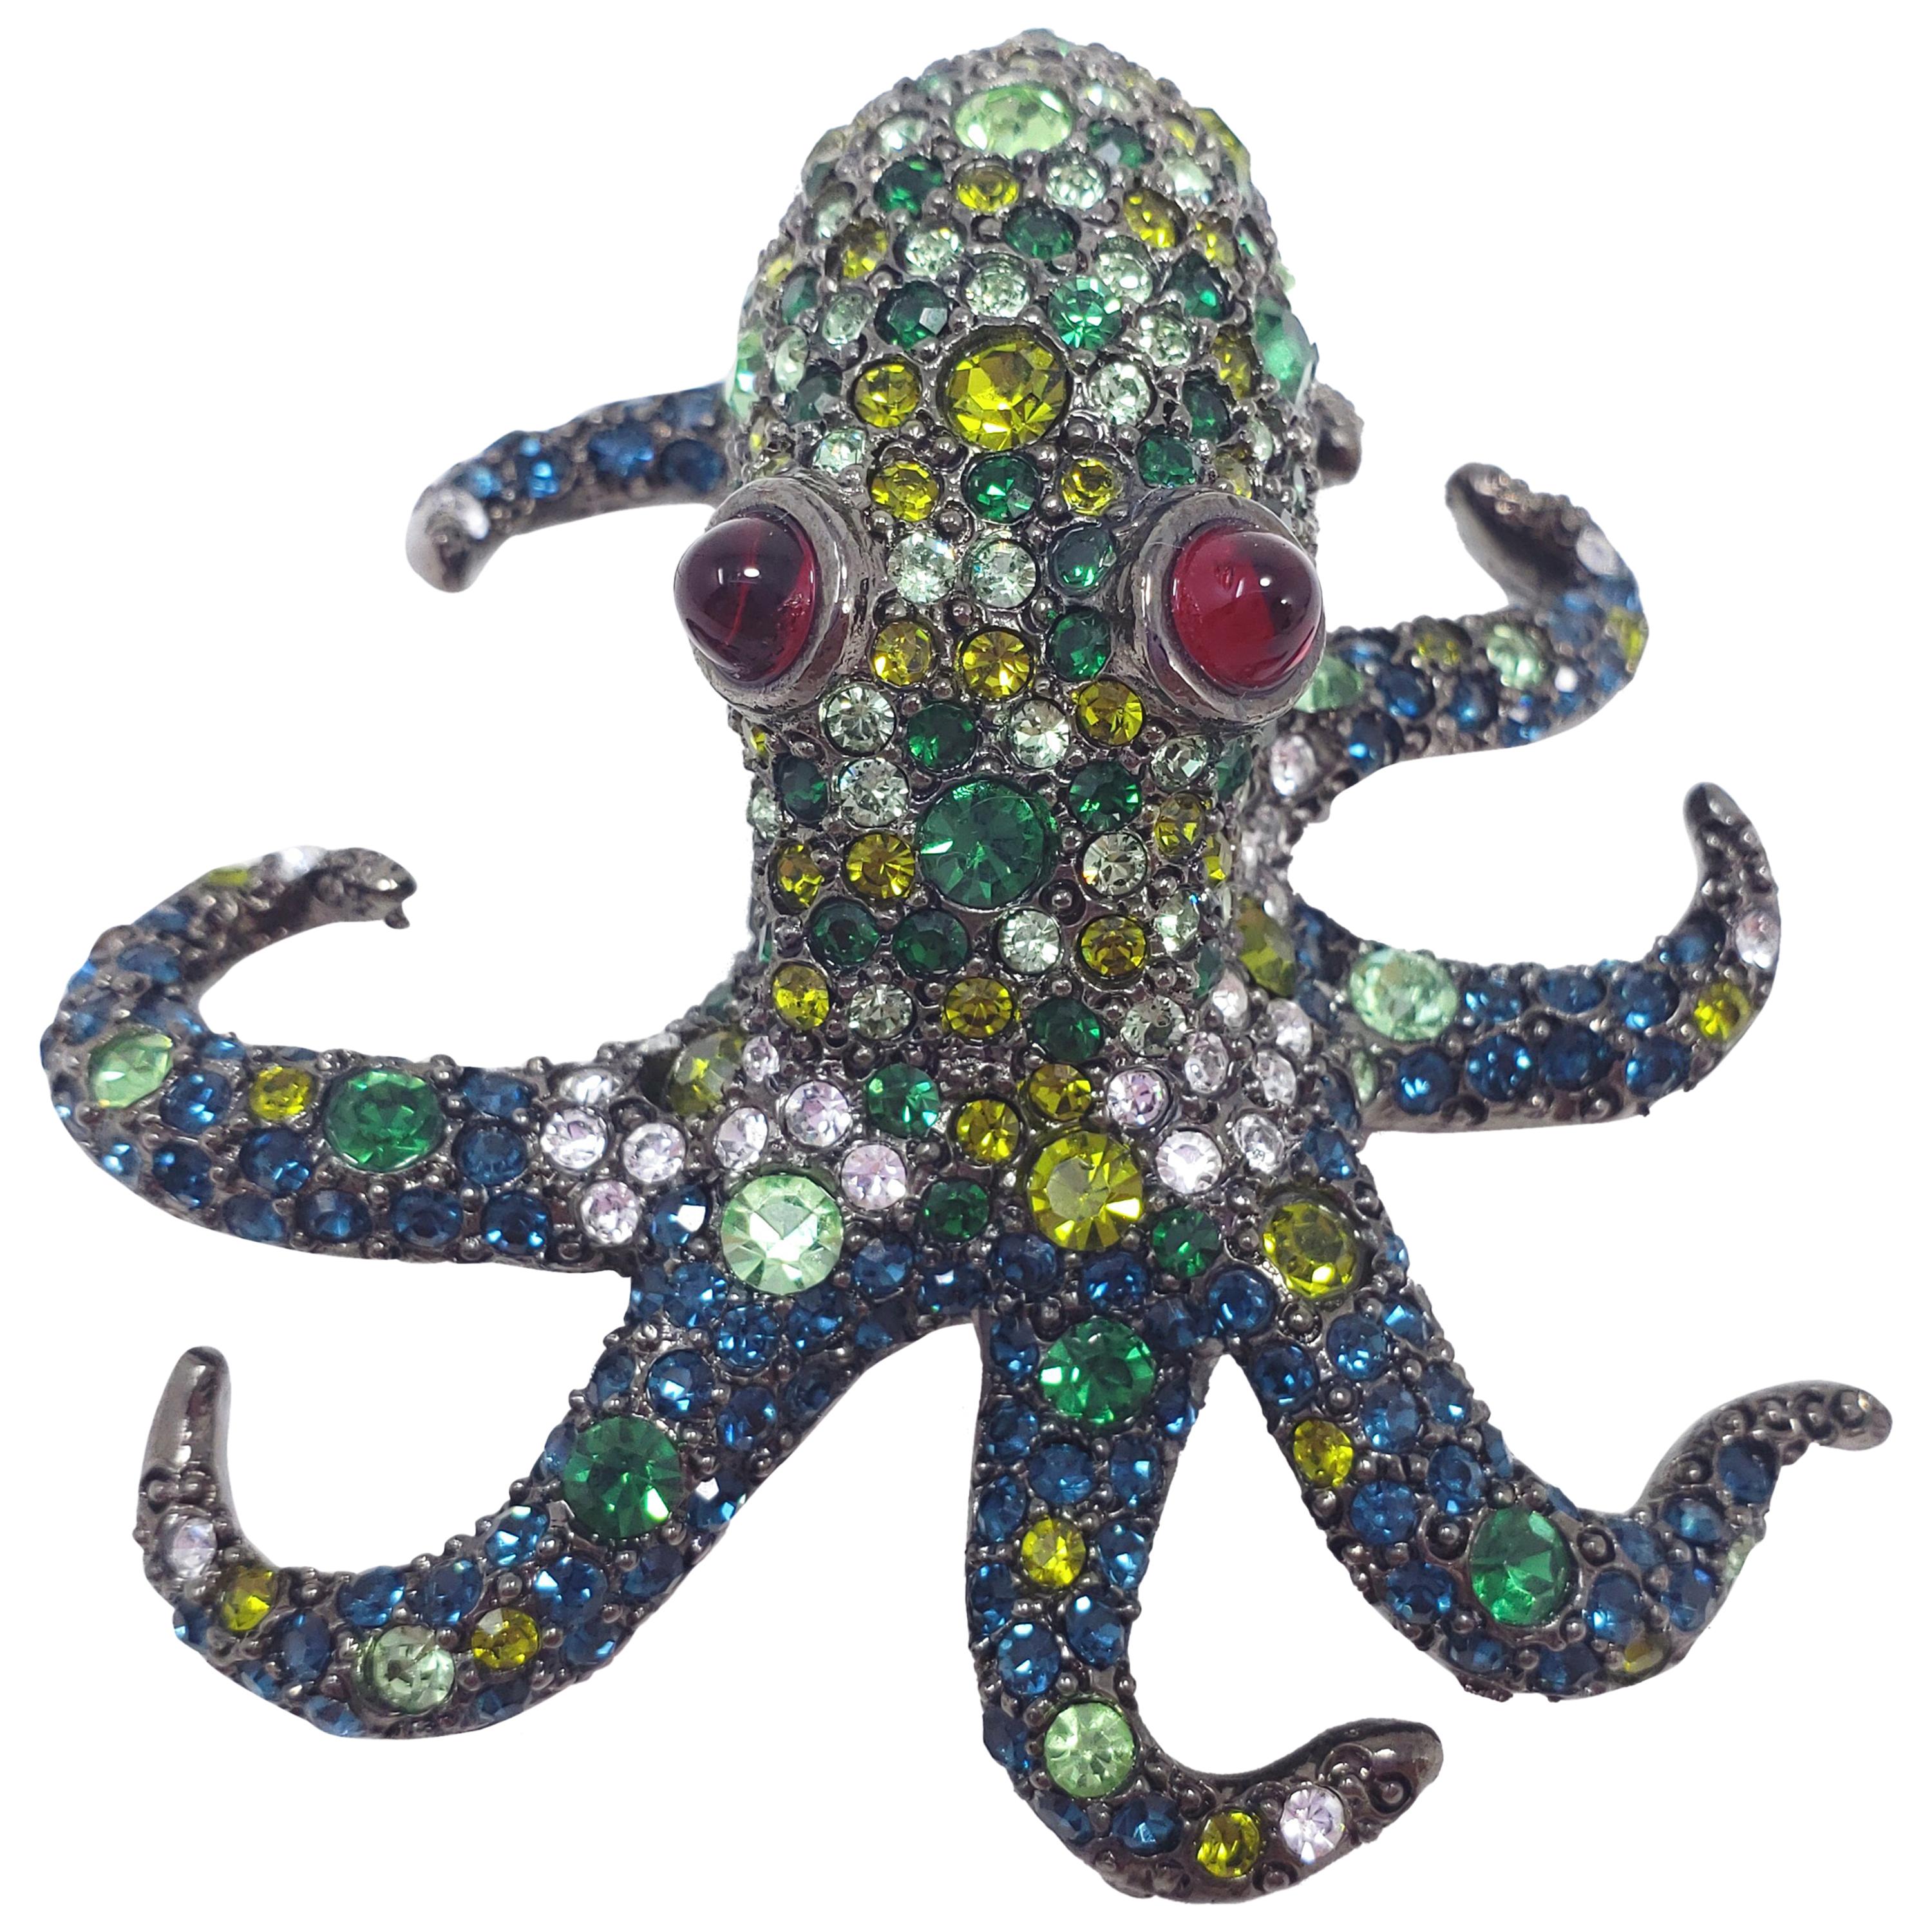 KJL Kenneth Jay Lane Pave Green and White Crystal Octopus Brooch